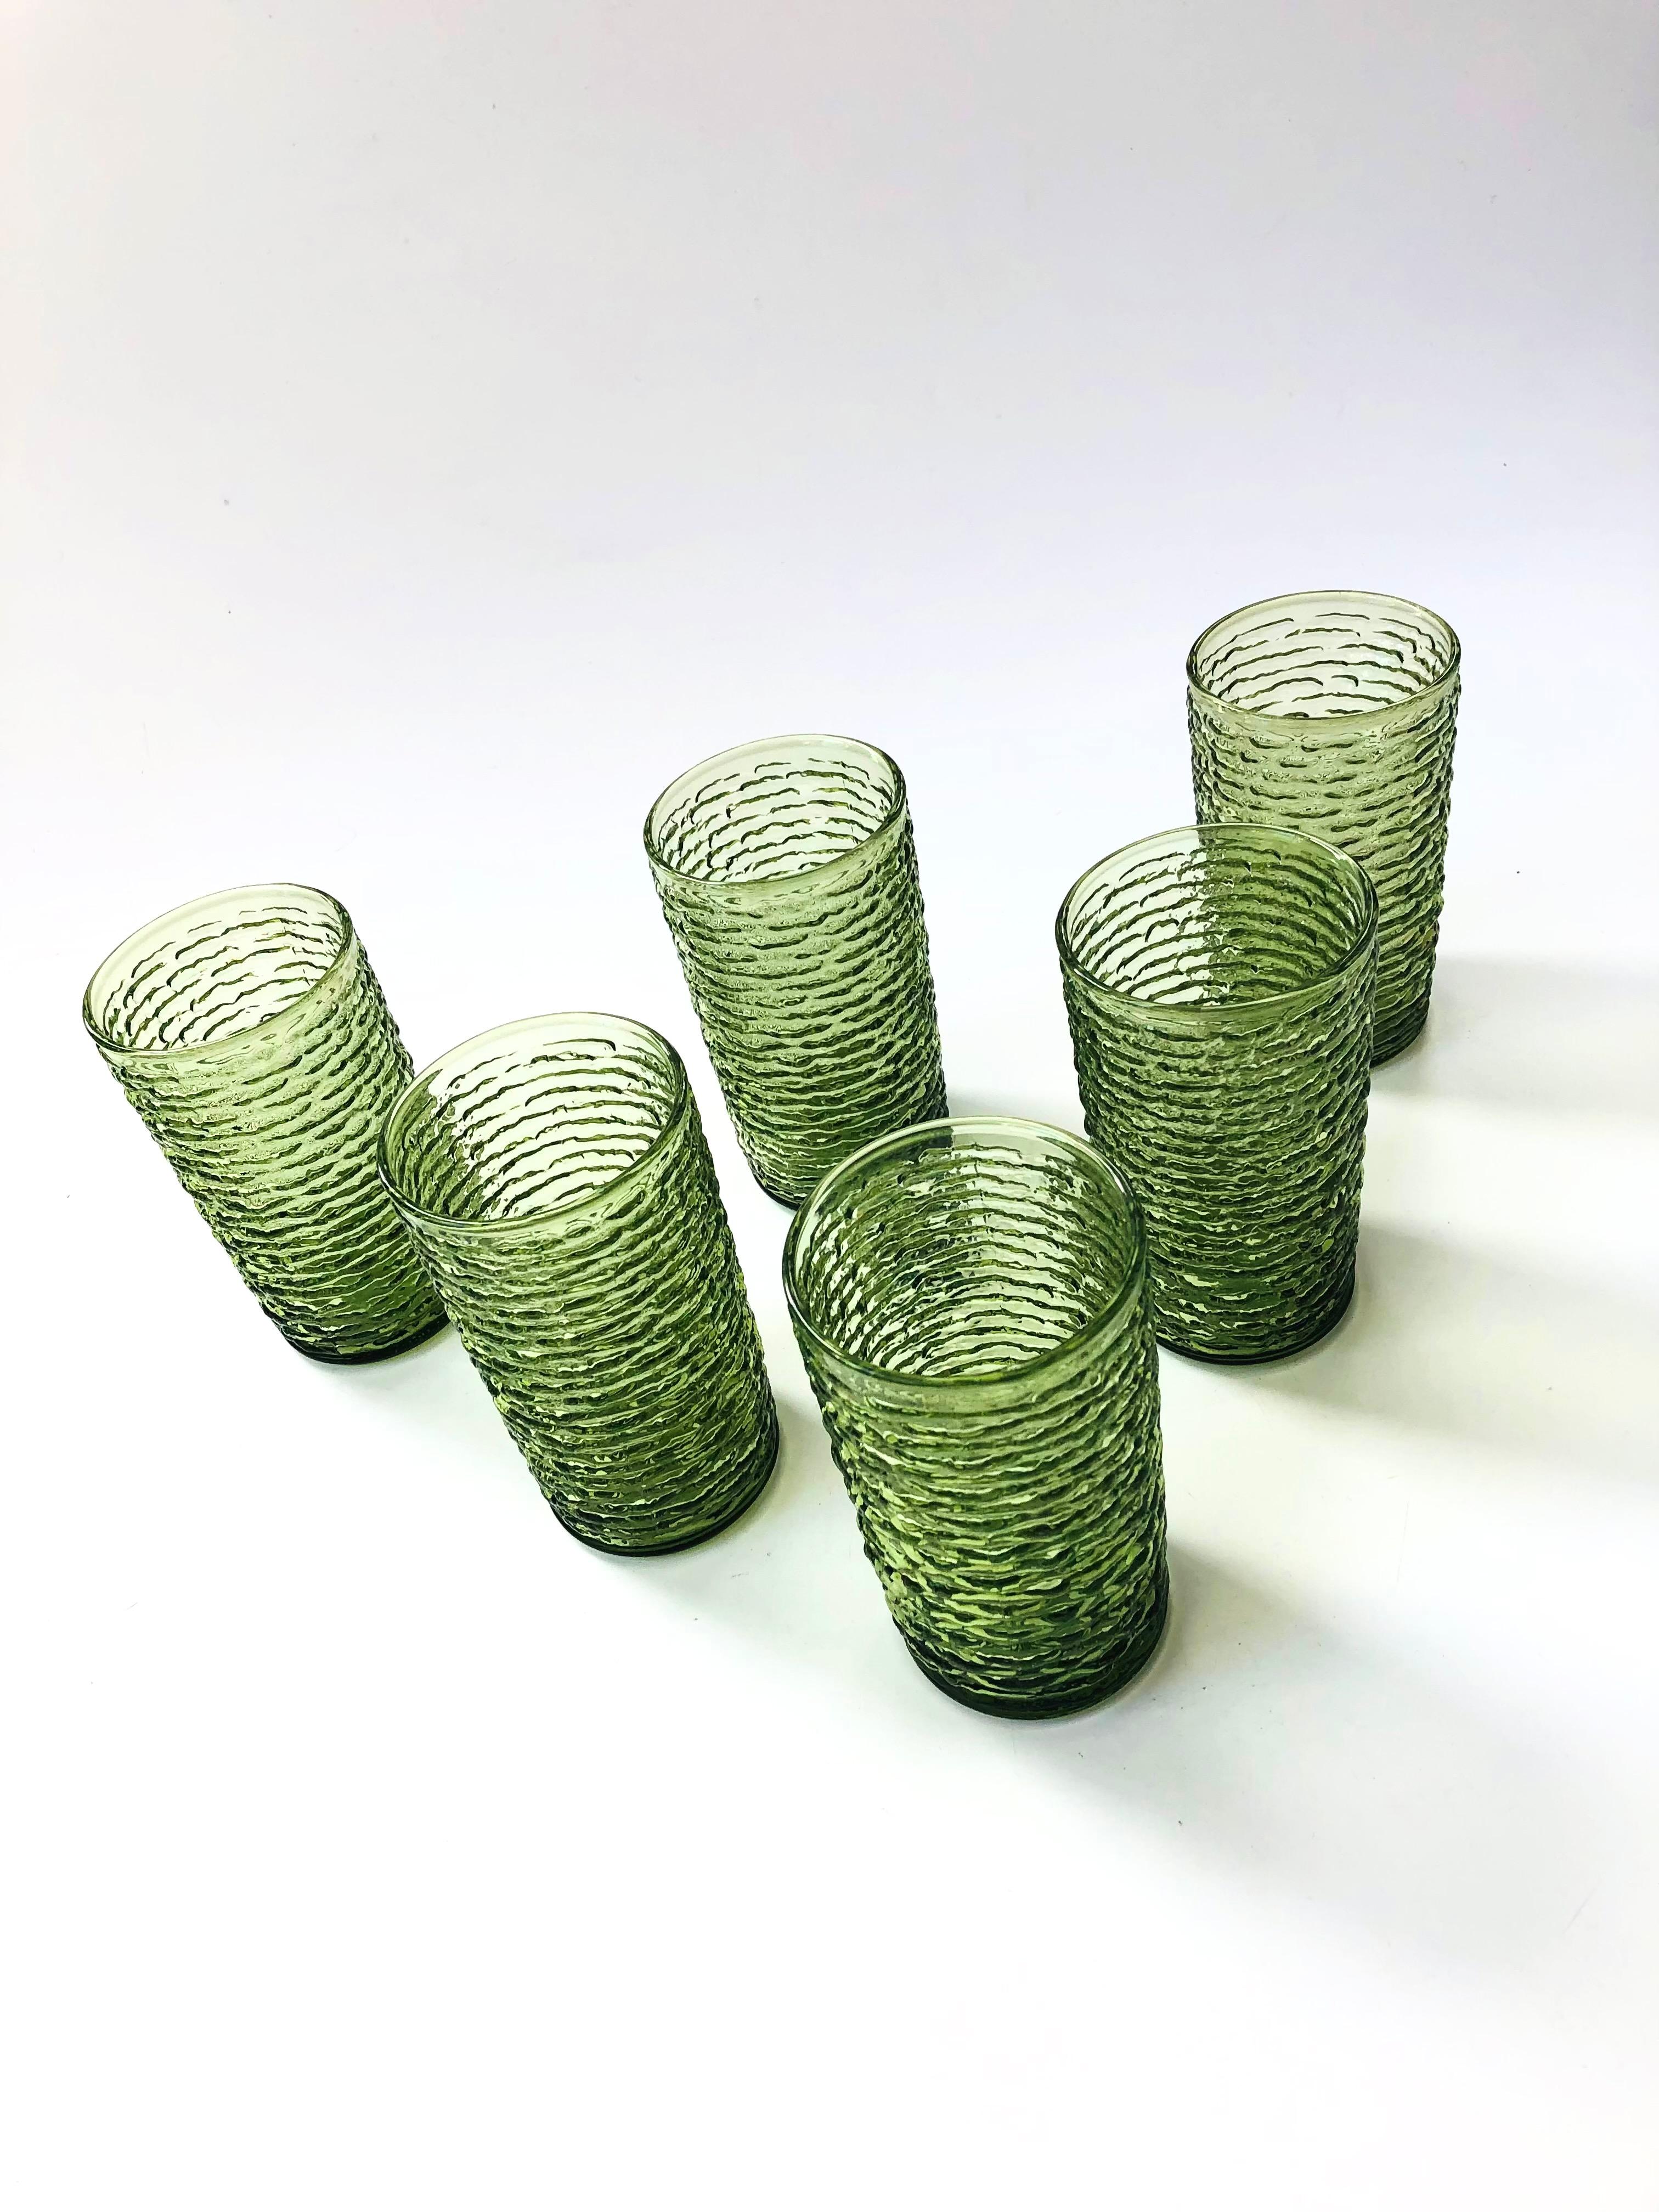 A set of 6 mid century highball glasses in textured green glass. Made by Anchor Hocking in the 